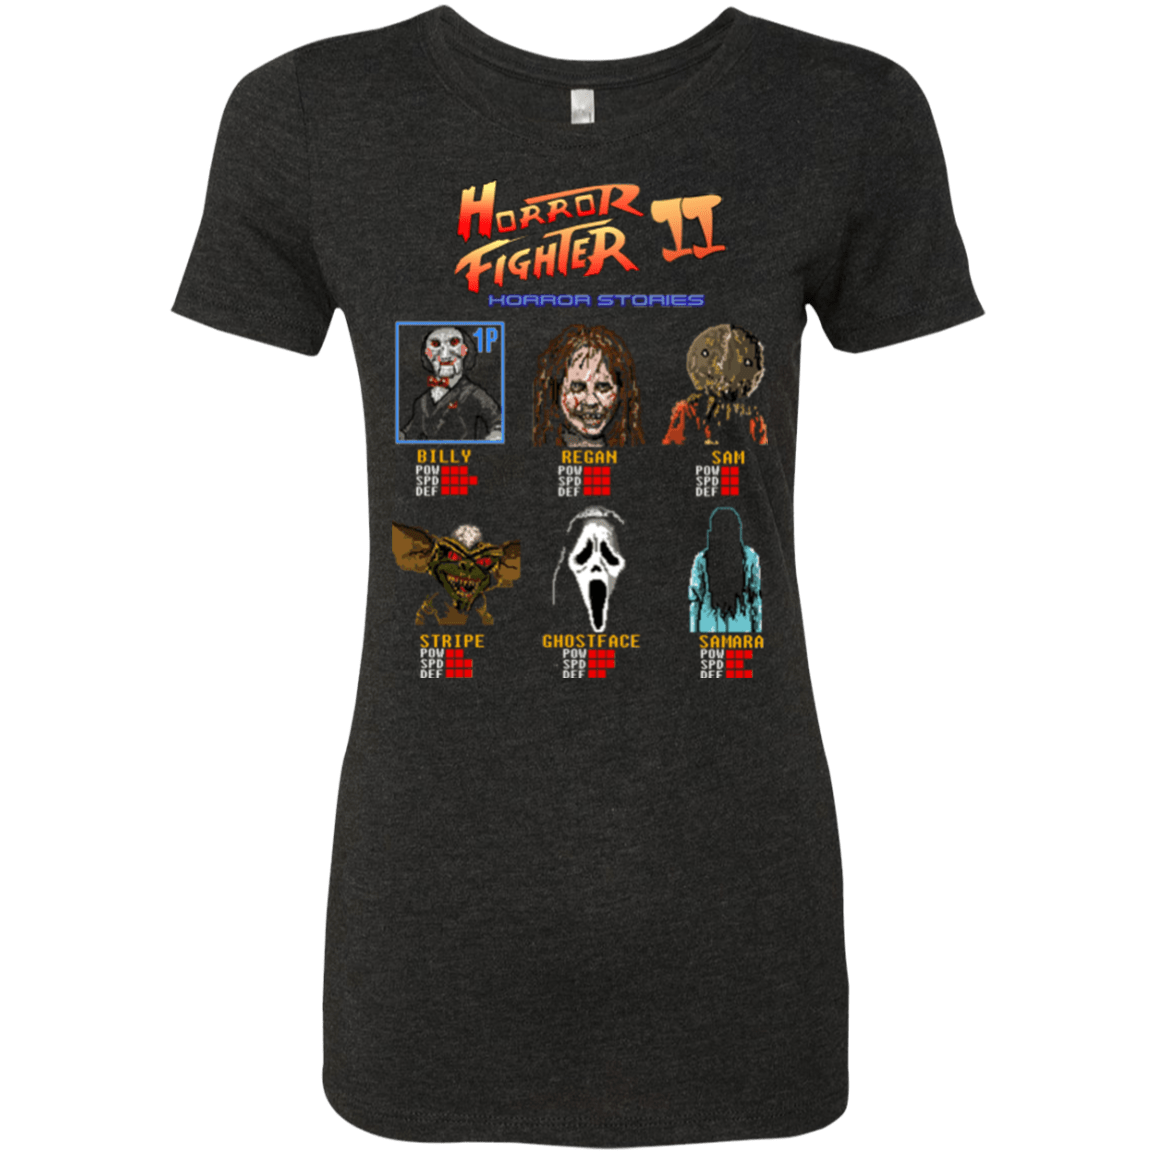 T-Shirts Vintage Black / Small Horror Fighter 2 Women's Triblend T-Shirt